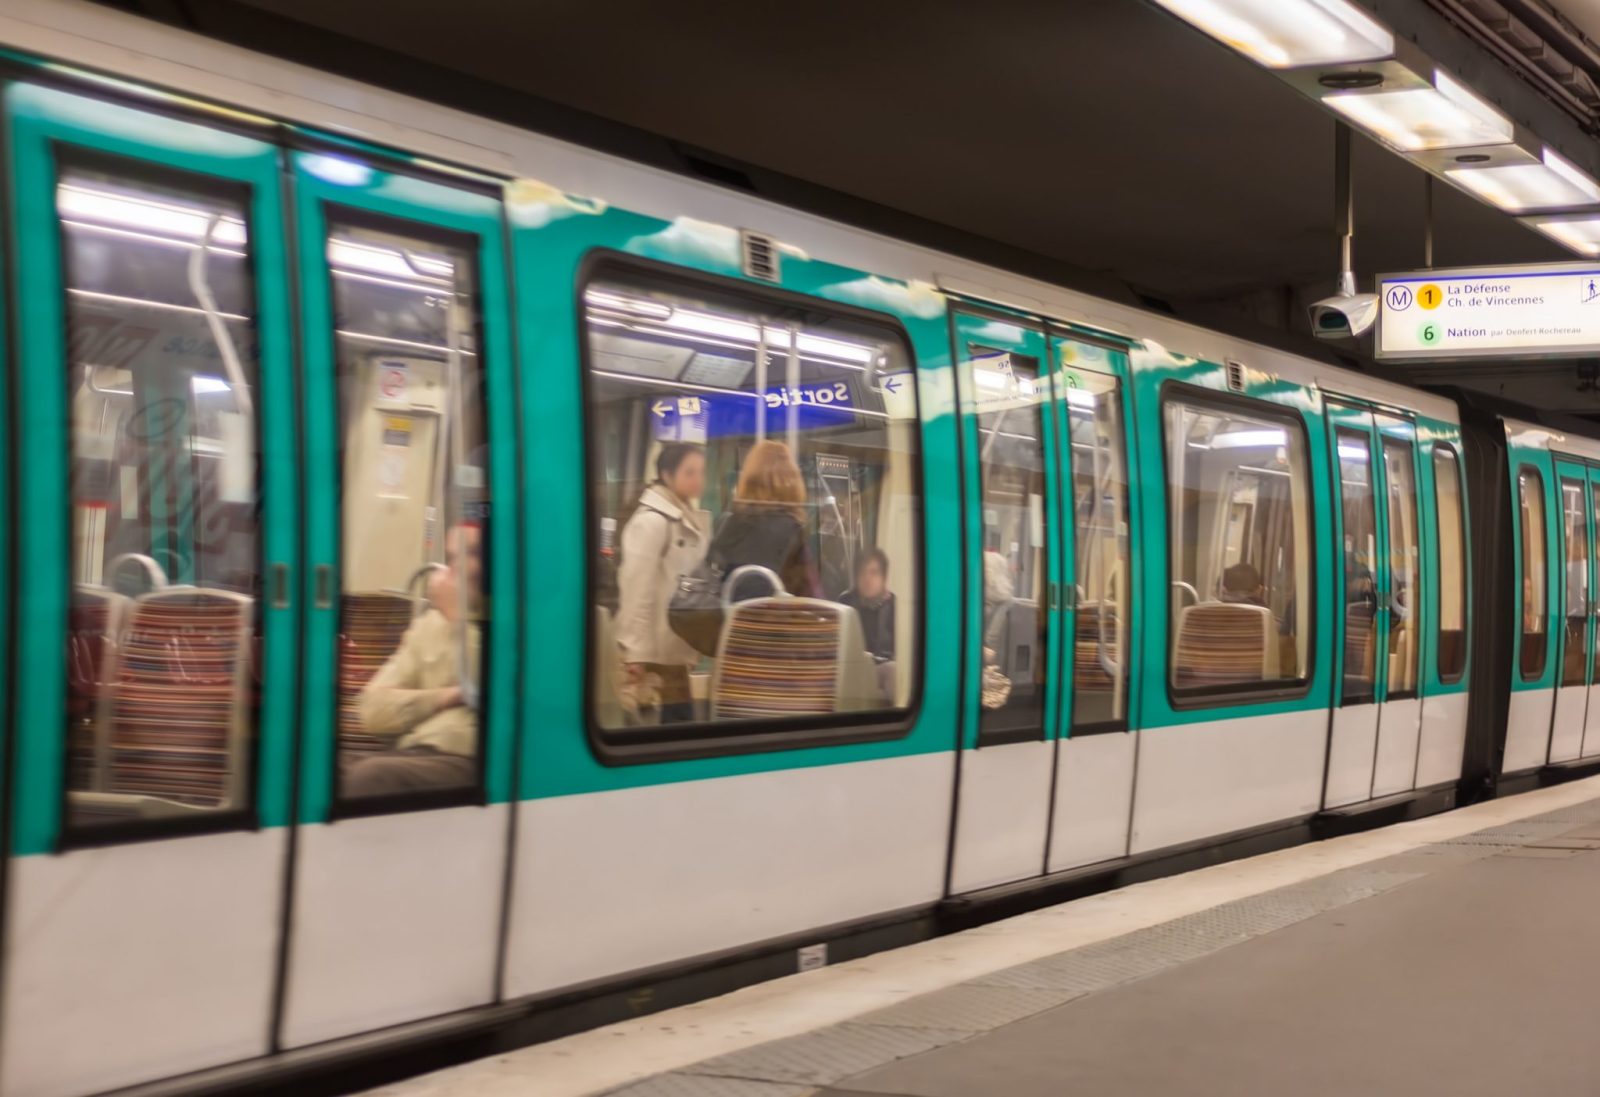 Metro train in a Paris station, France.